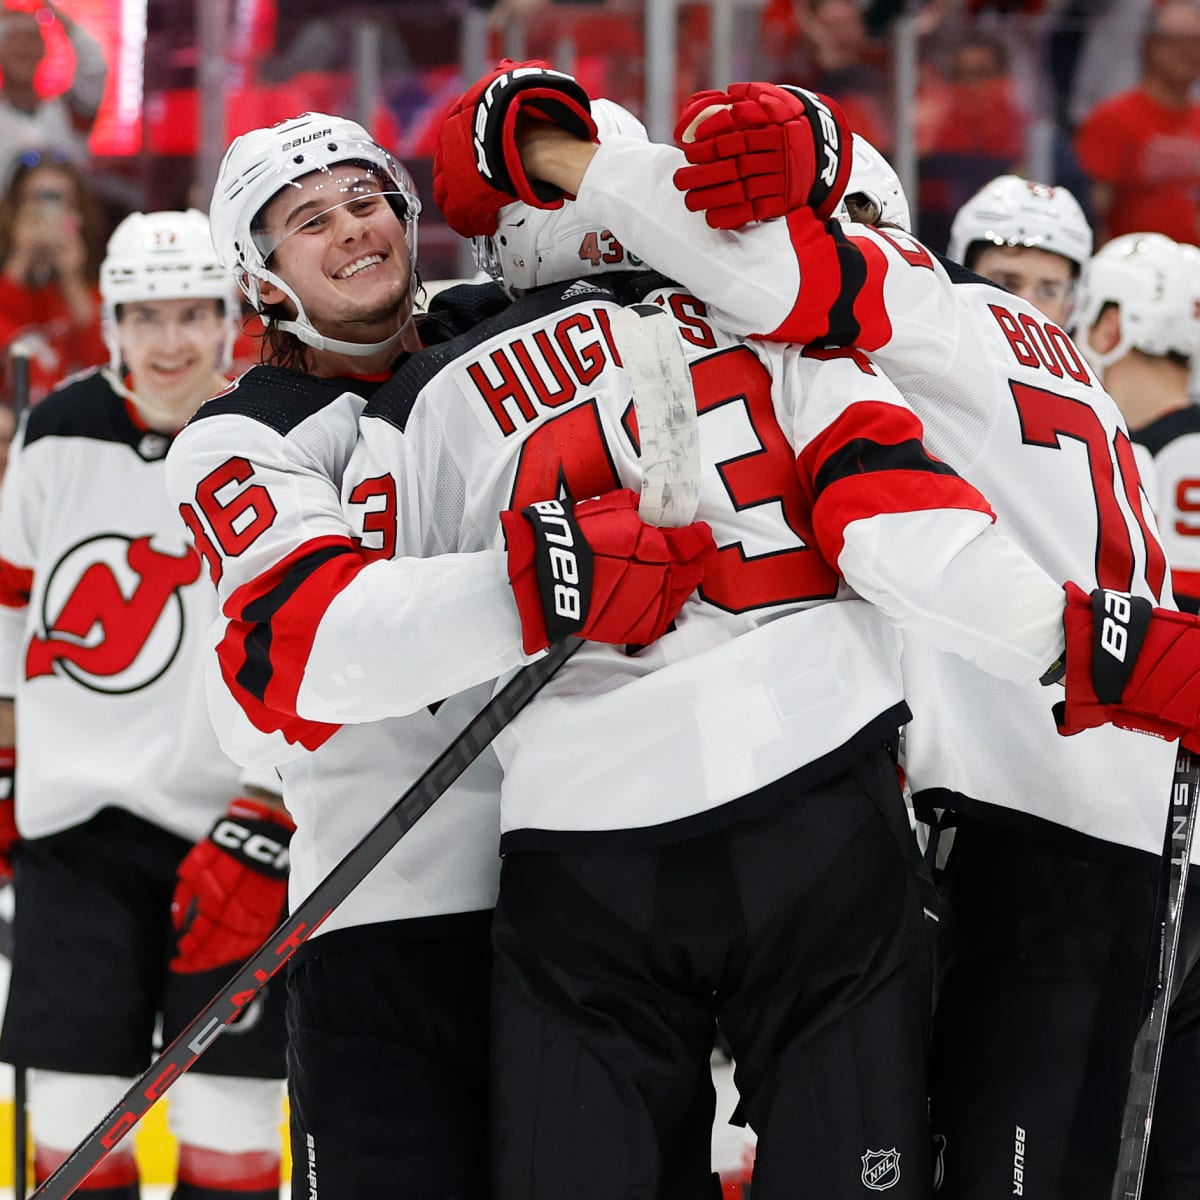 Game Preview: New Jersey Devils vs. Boston Bruins - All About The Jersey